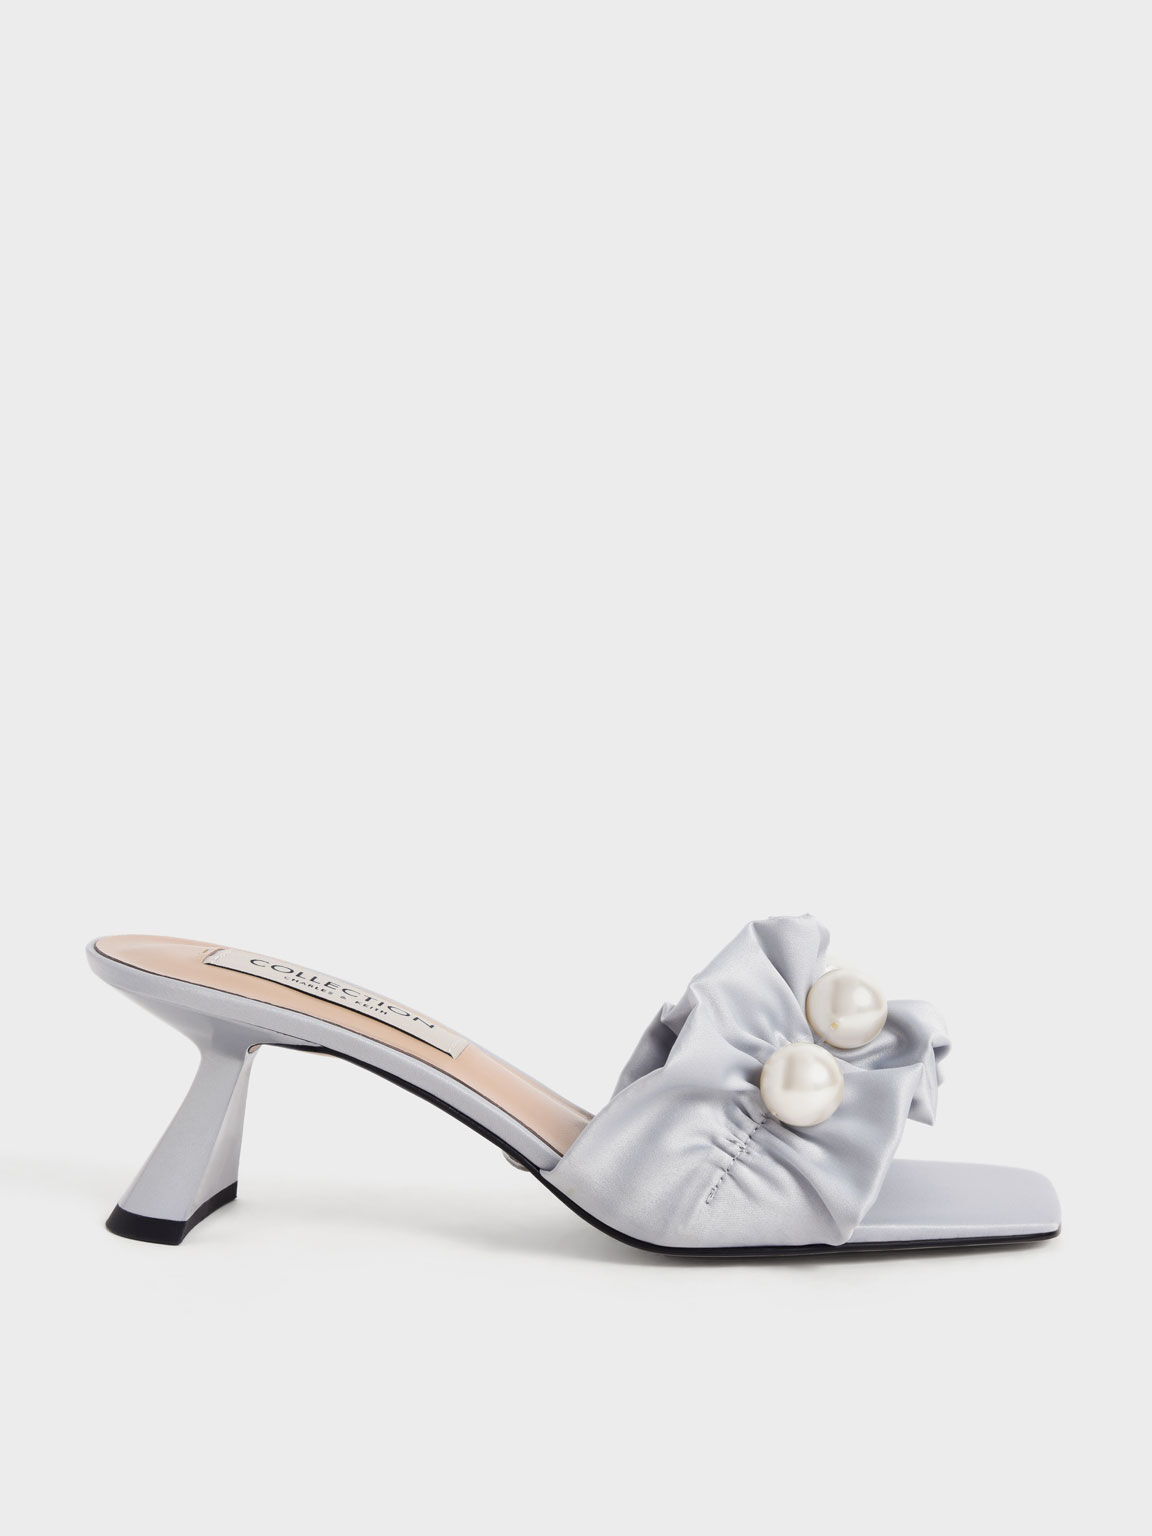 SALE: Women's Shoes | Shop Online | CHARLES & KEITH UK